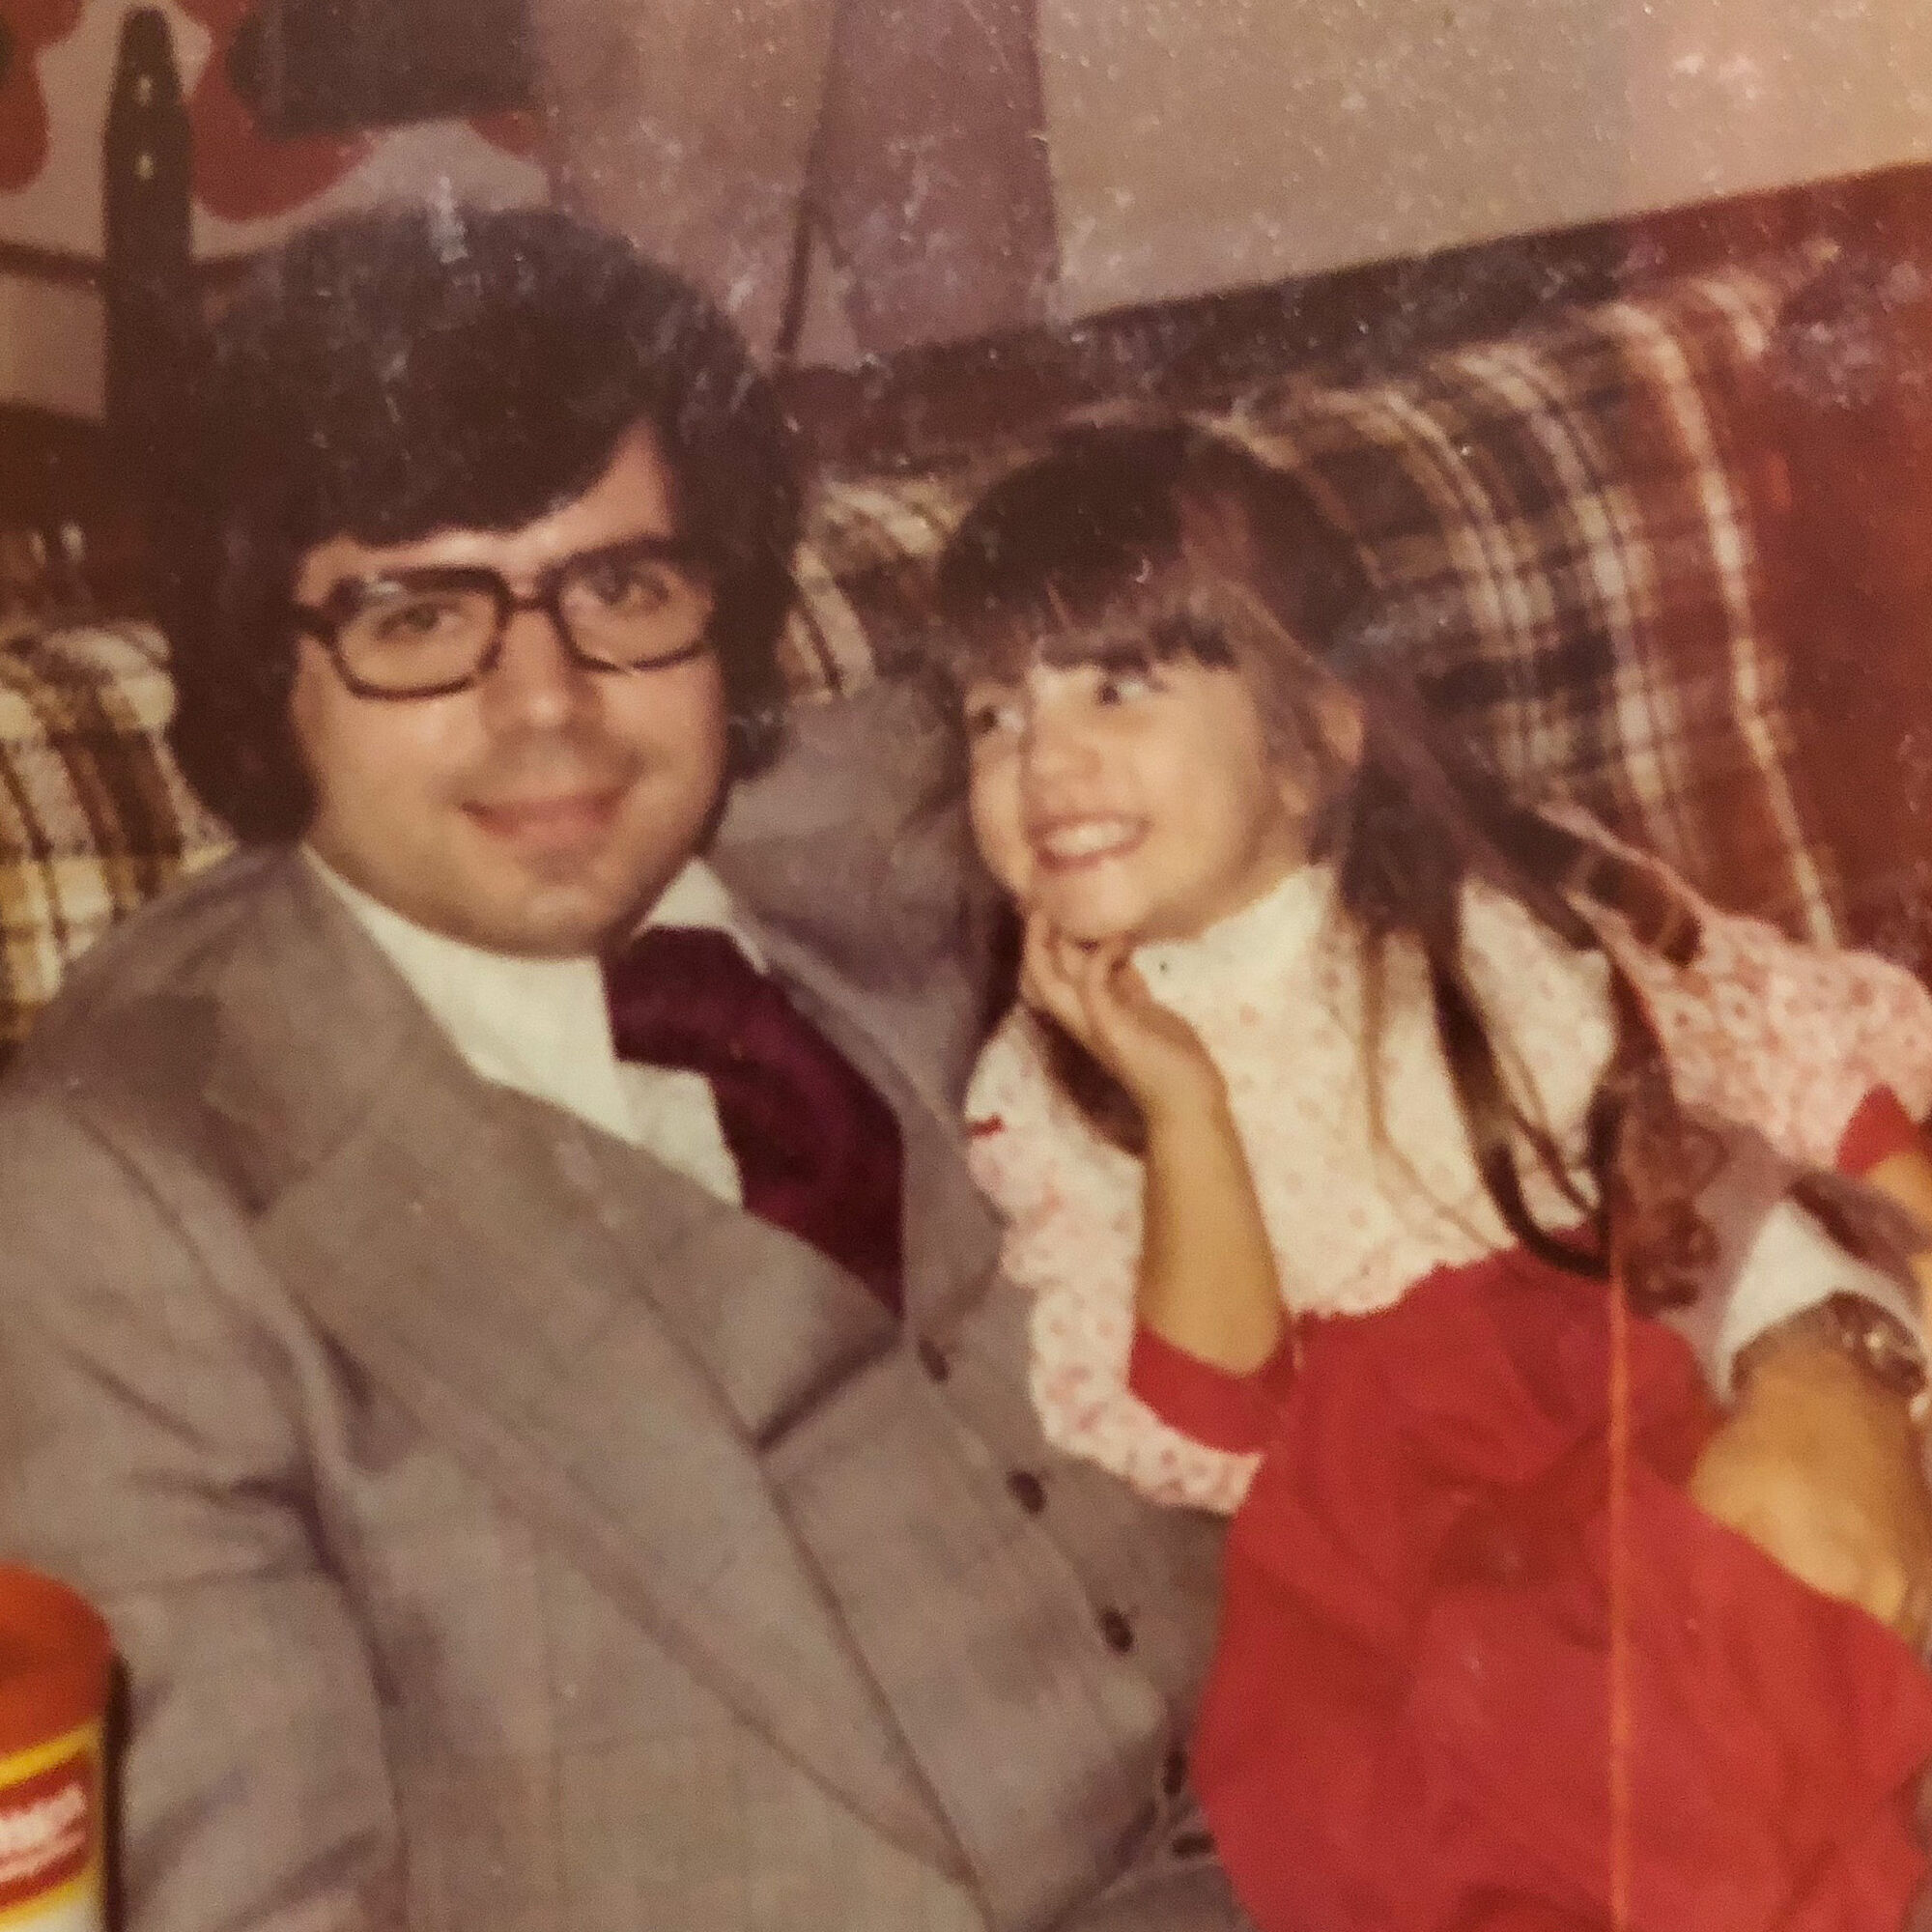 Elli Milan as a young girl sitting and smiling on her father's lap